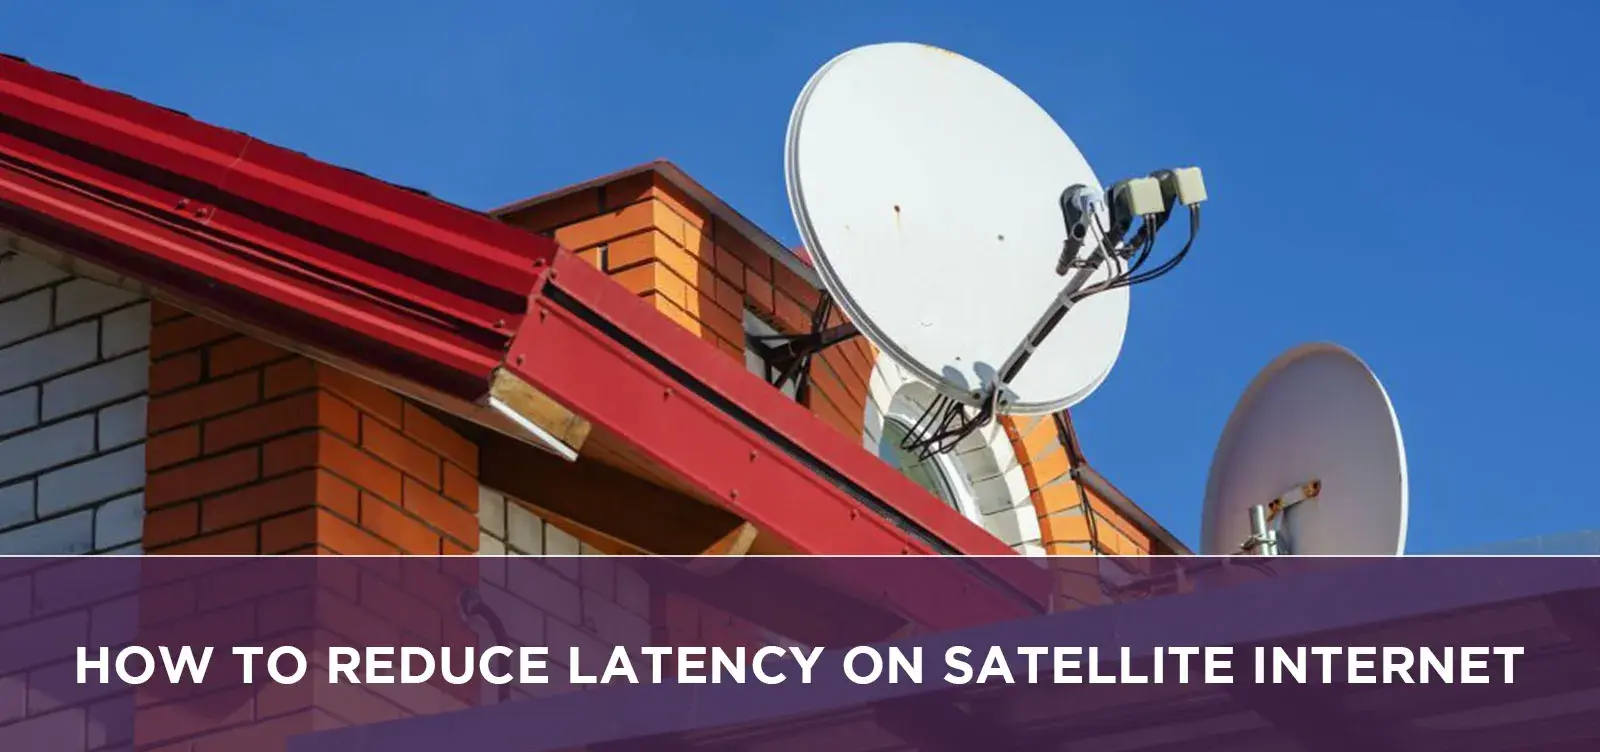 How To Reduce Latency On Satellite Internet?